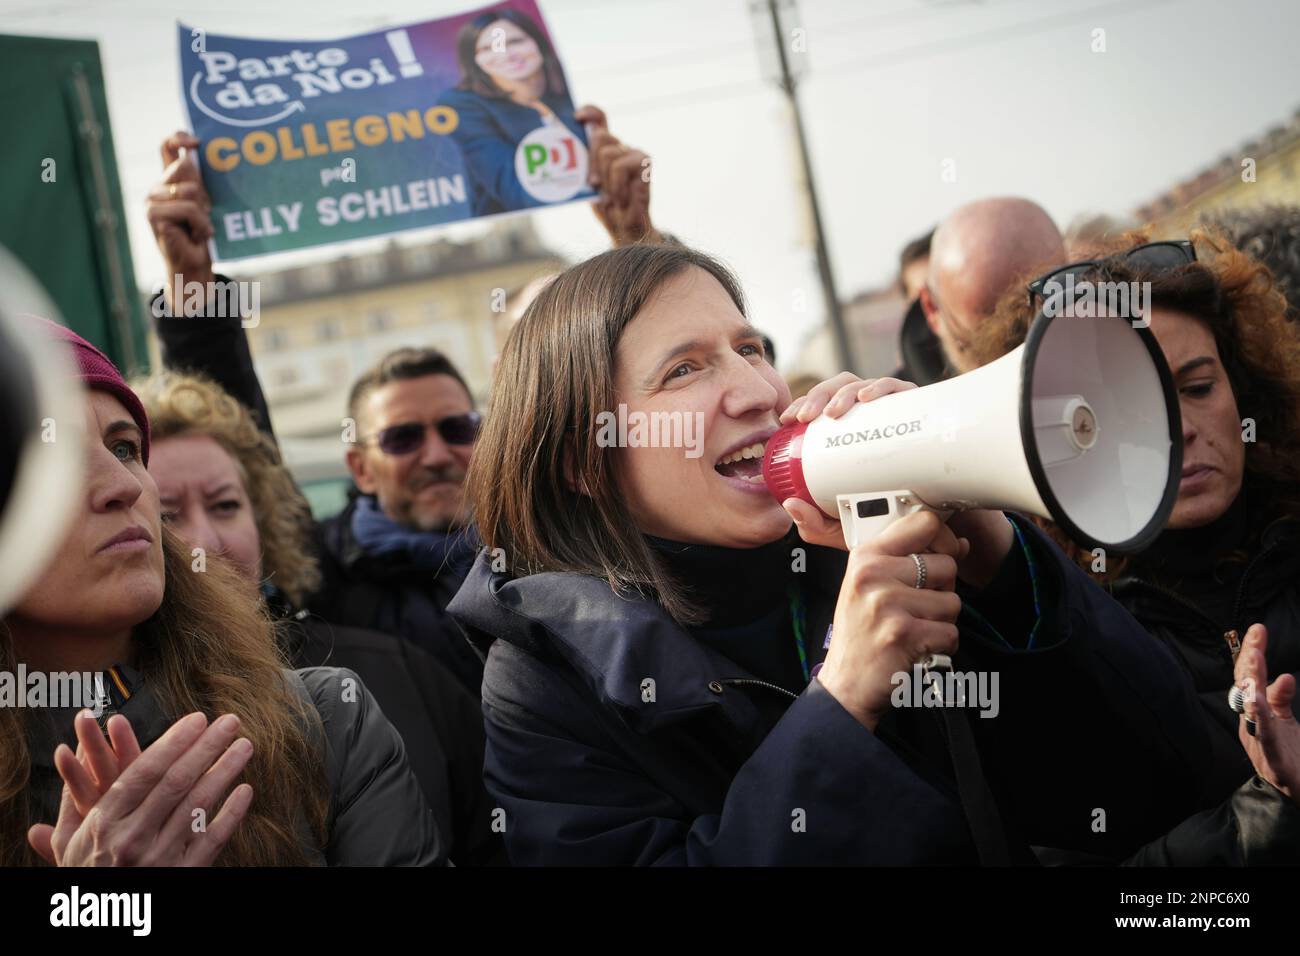 Elly Schlein, the Democratic Party candidate's tour for party secretary in the Feb. 26 primaries. Turin, Italy - February 2023 Stock Photo